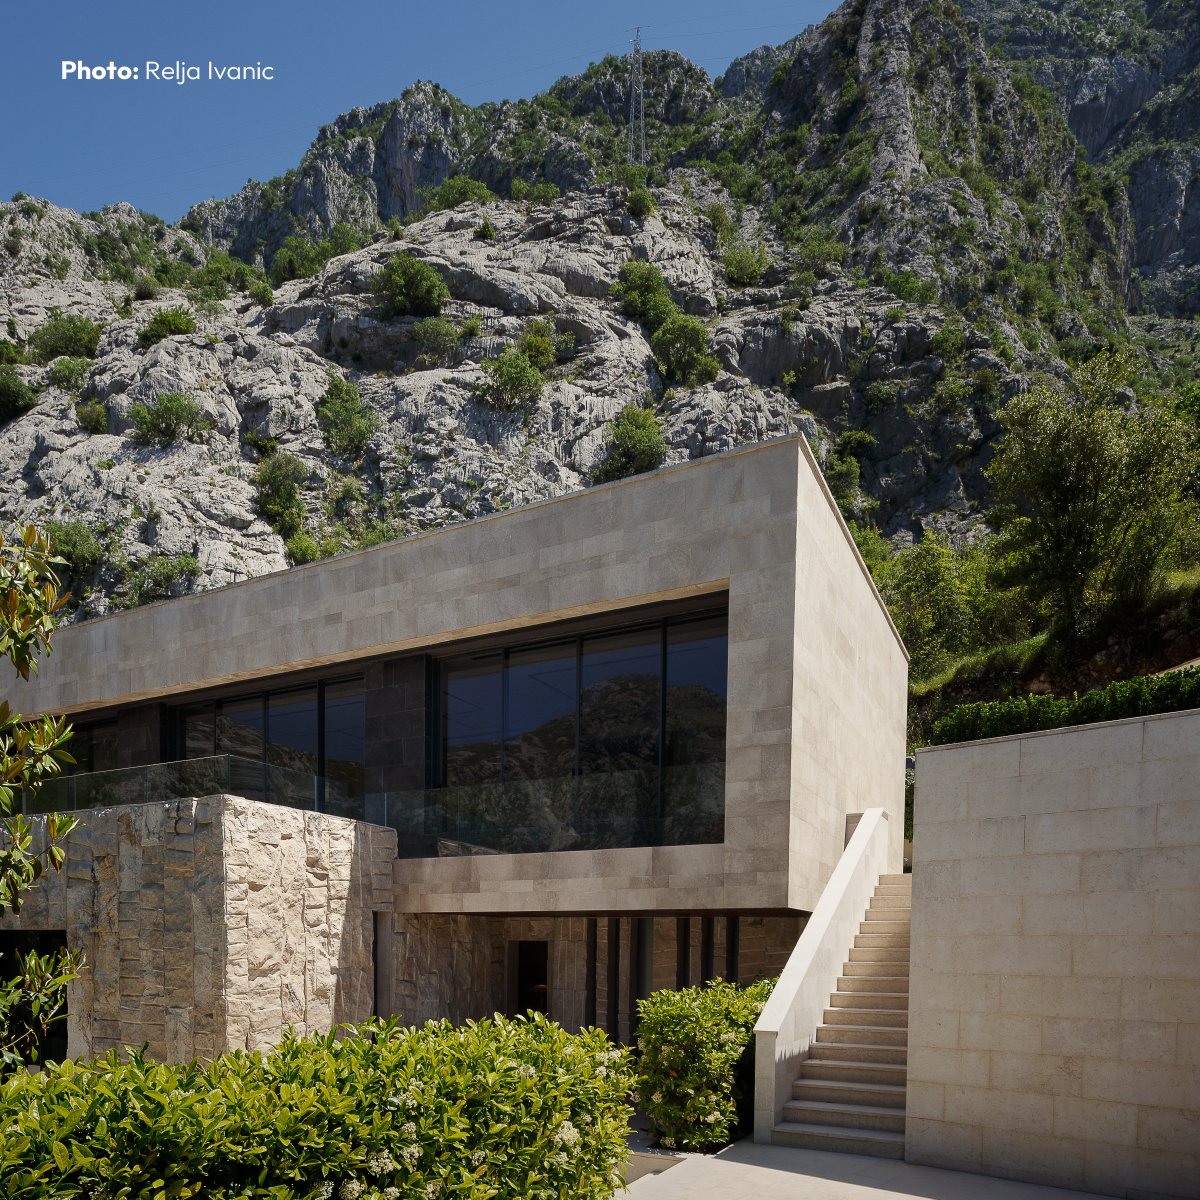 Mandragora Villa, by Dr Sonja Radovic, used our reinforced concrete to adapt to the local terrain and take advantage of natural light, offering stunning views of Montenegro. It was a 2023 #CemexBuildingAward International Edition finalist in the Residential Housing category.